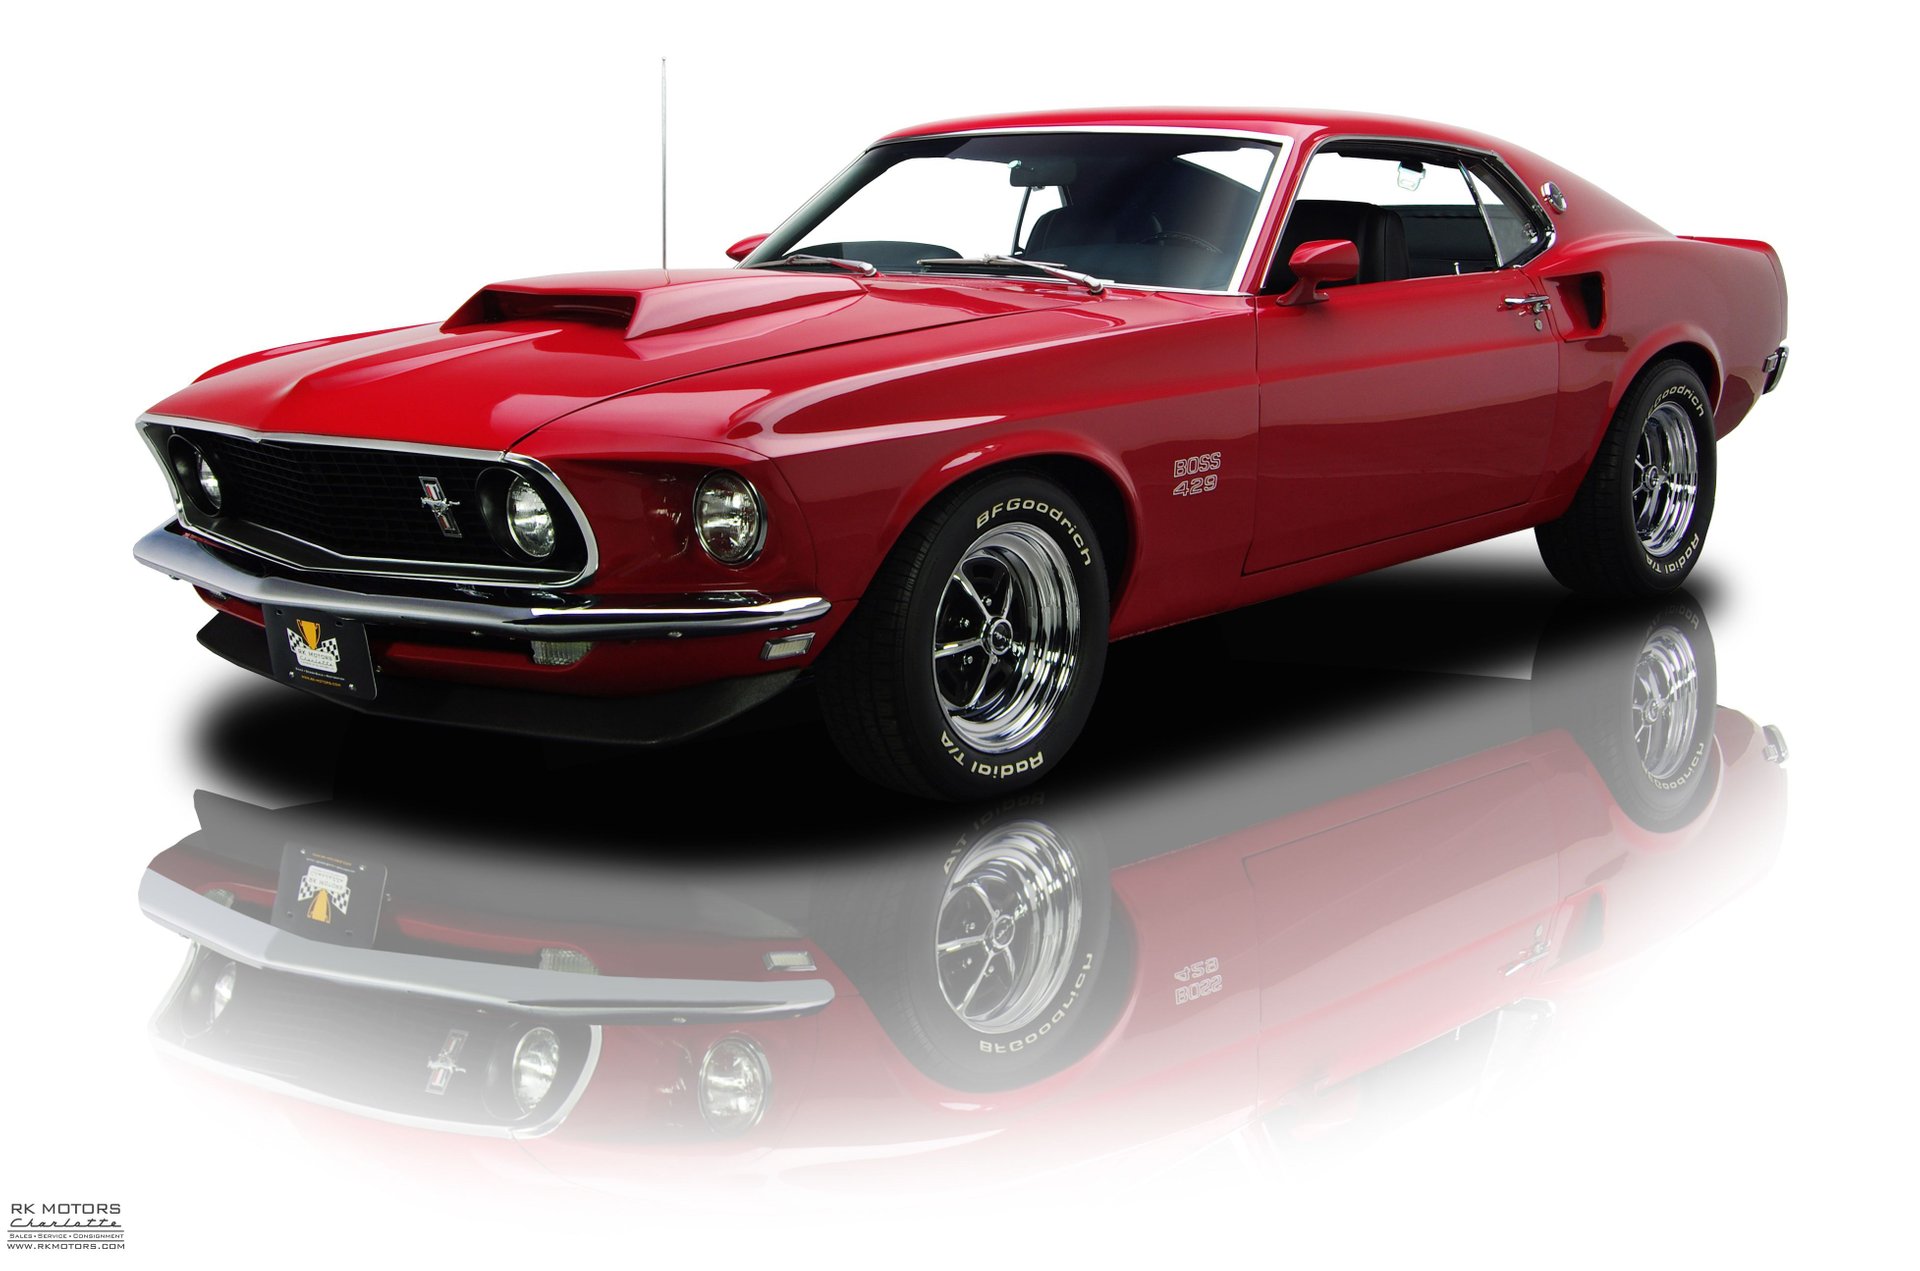 1969 Ford Mustang Rk Motors Classic Cars And Muscle Cars For Sale